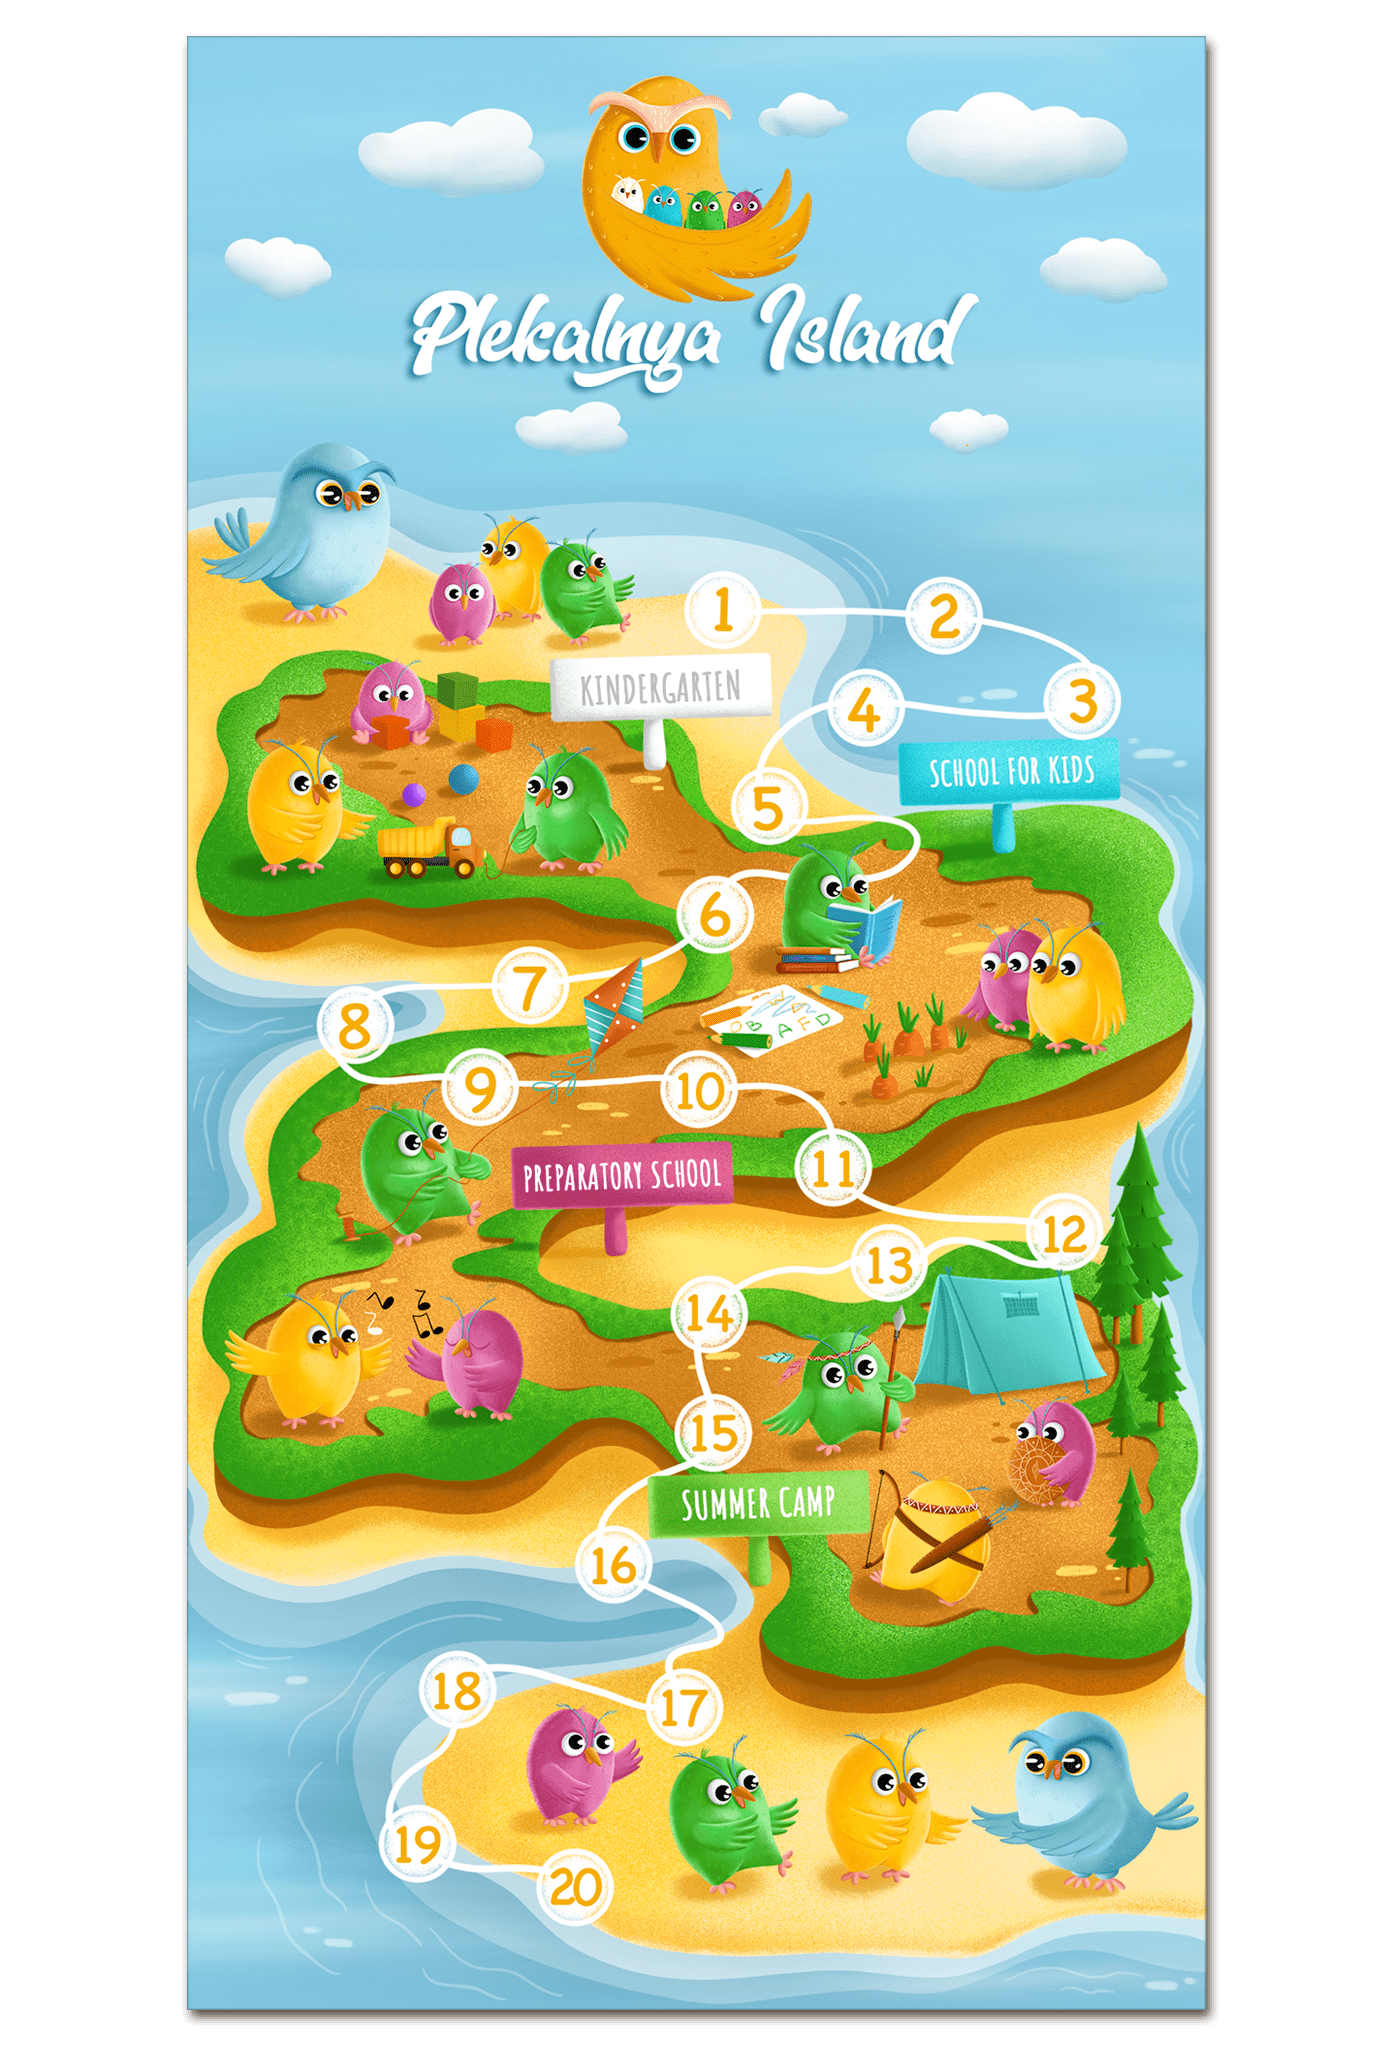 board game brended game Children Game game illustration game illustration owls kids board game kids game kids illustration owls